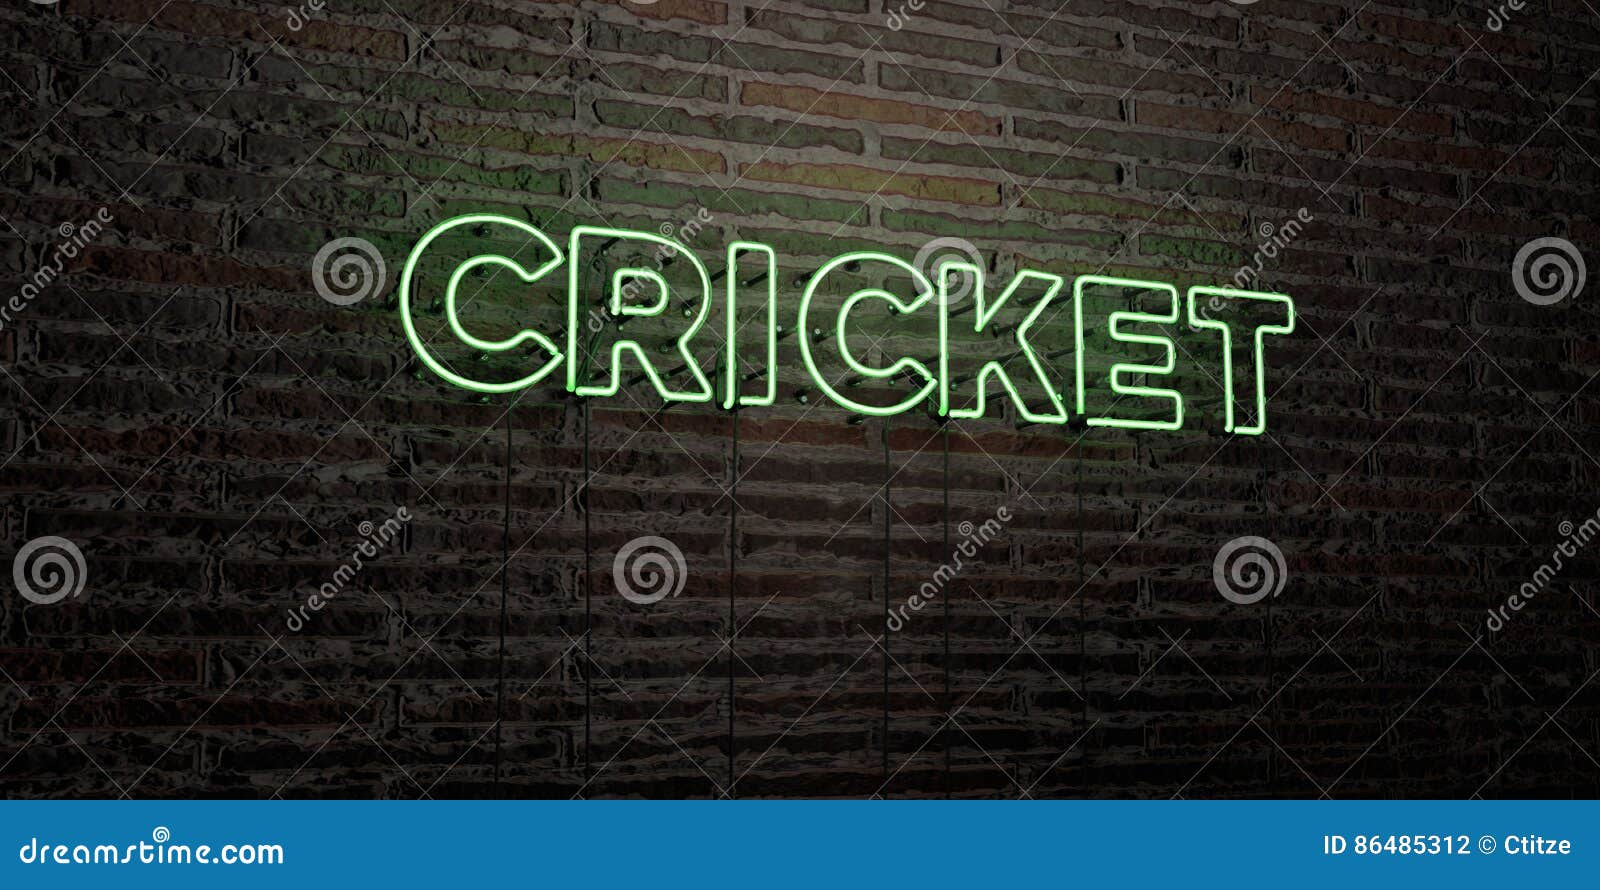 CRICKET -Realistic Neon Sign on Brick Wall Background - 3D Rendered Royalty Free Stock Image Stock Illustration